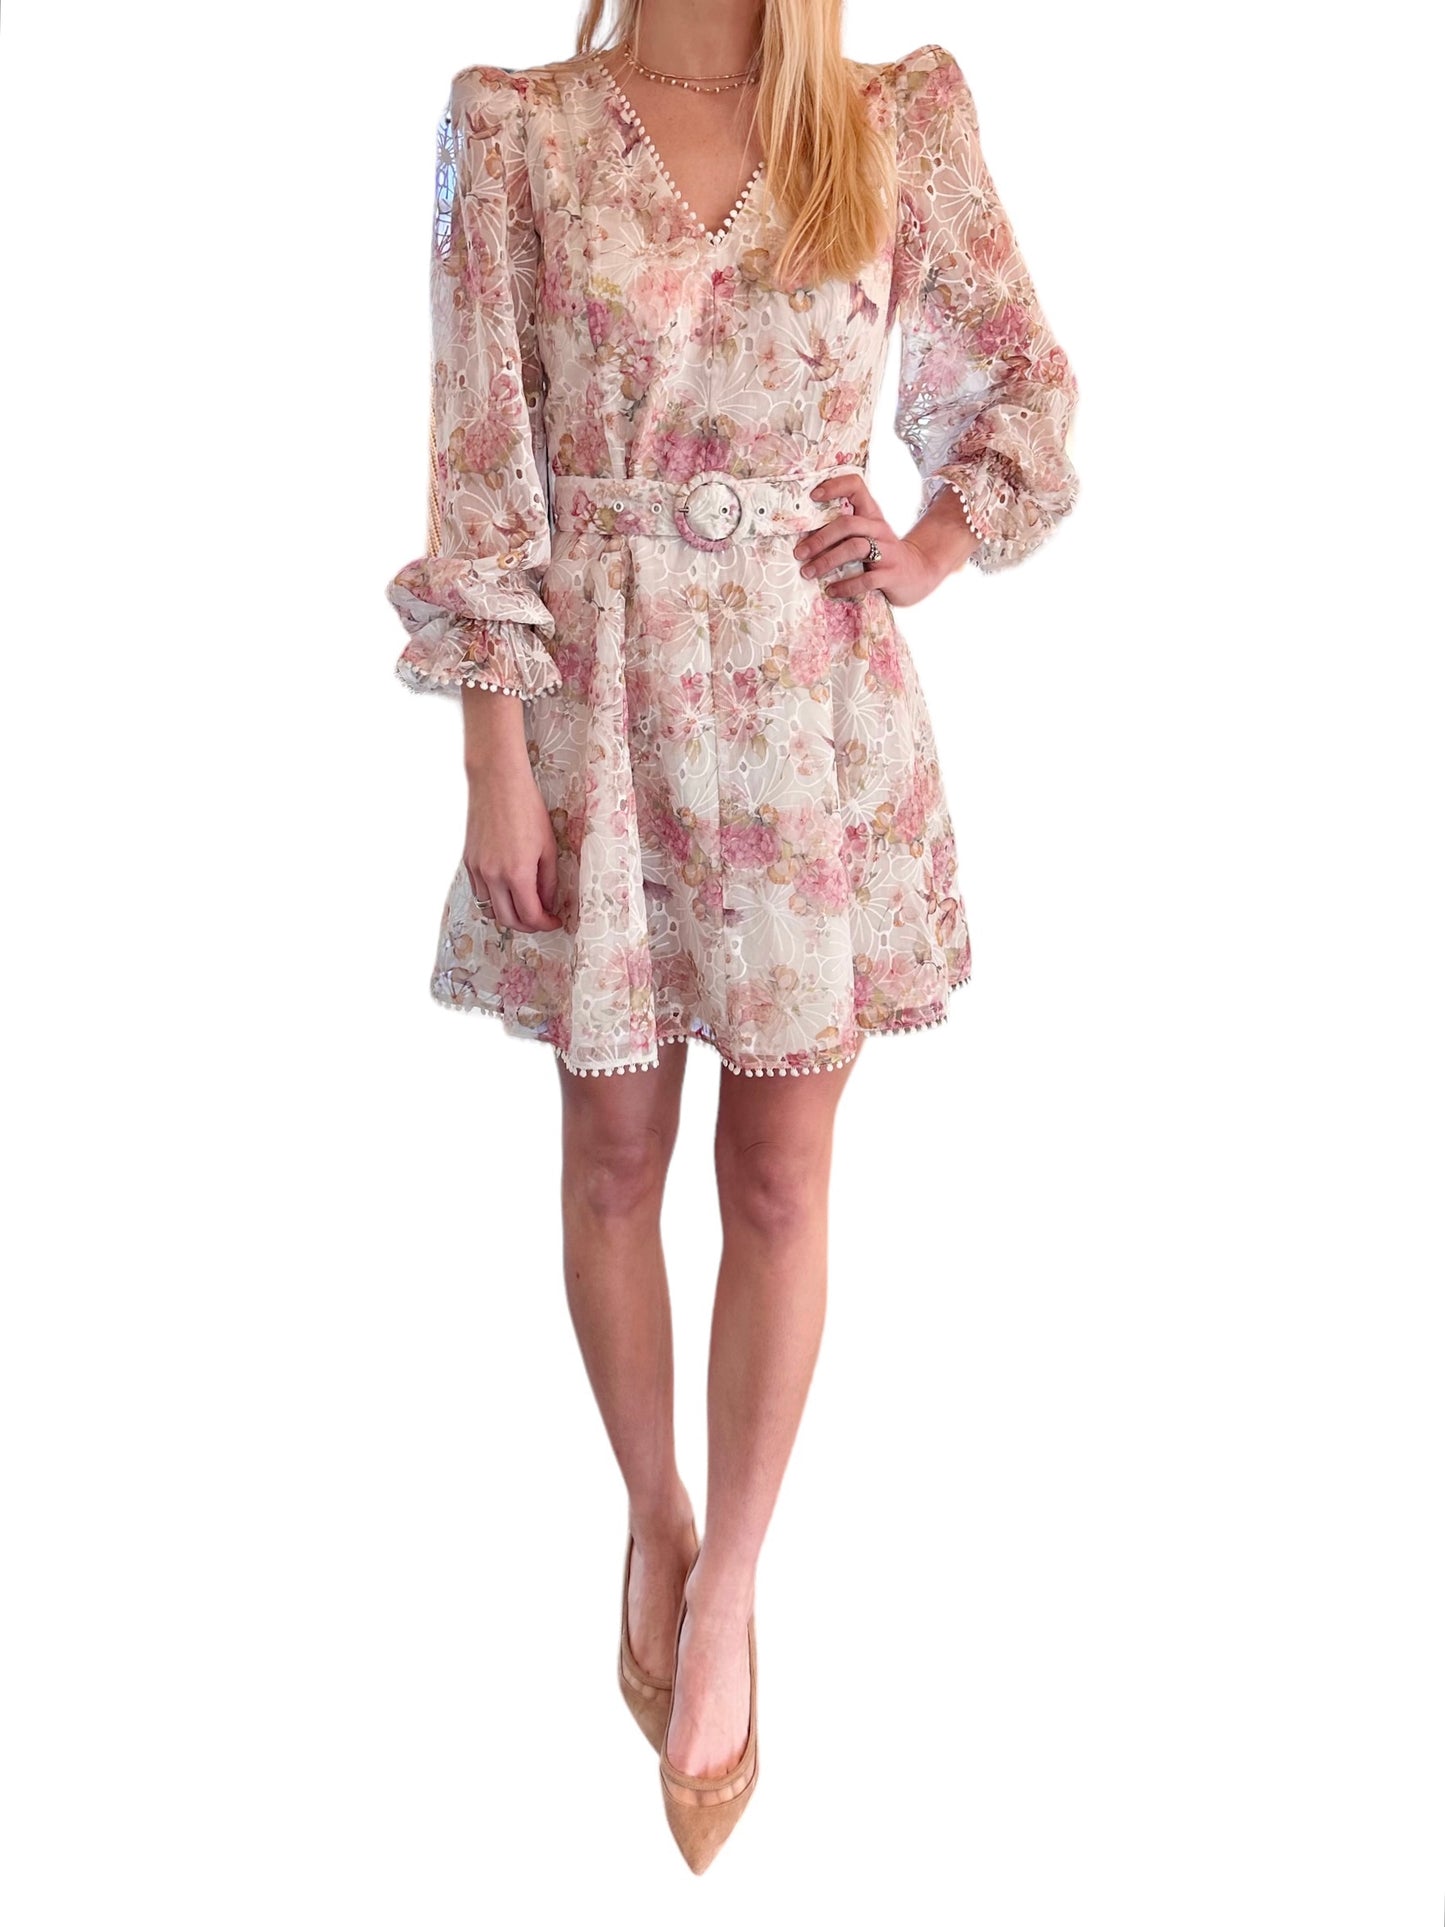 Haisley Mini Dress in white floral by Lucy Paris